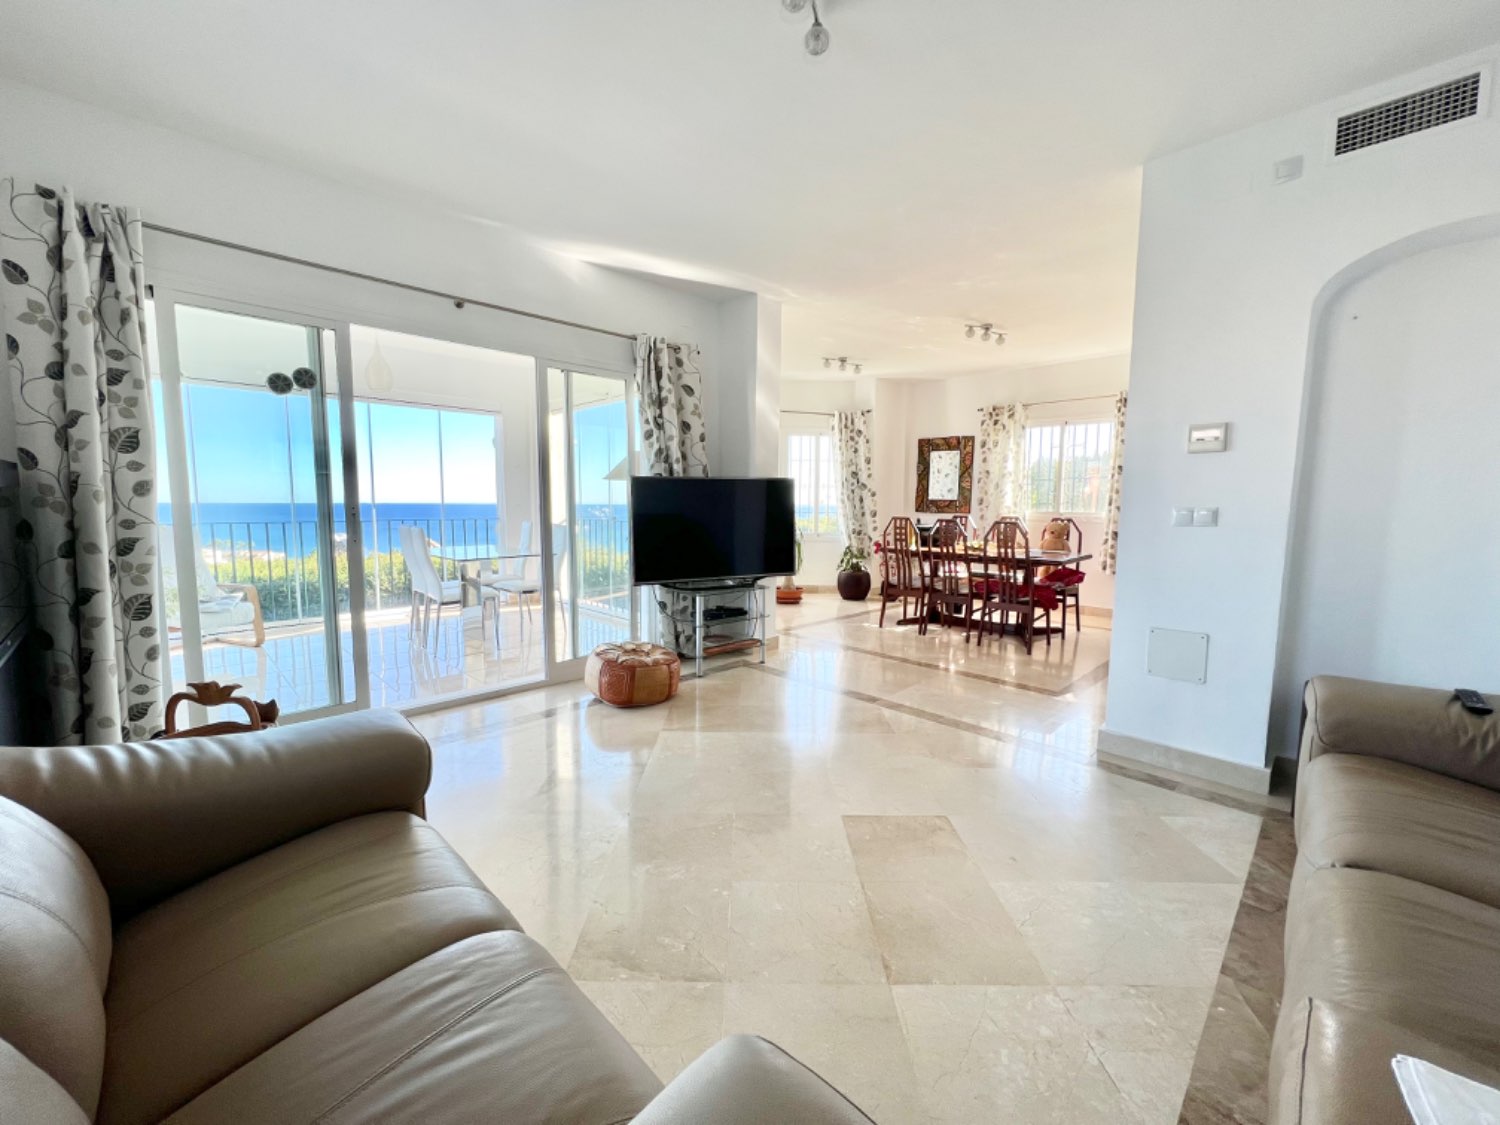 Beautiful four-bedroom house with spectacular sea views in Alcaidesa